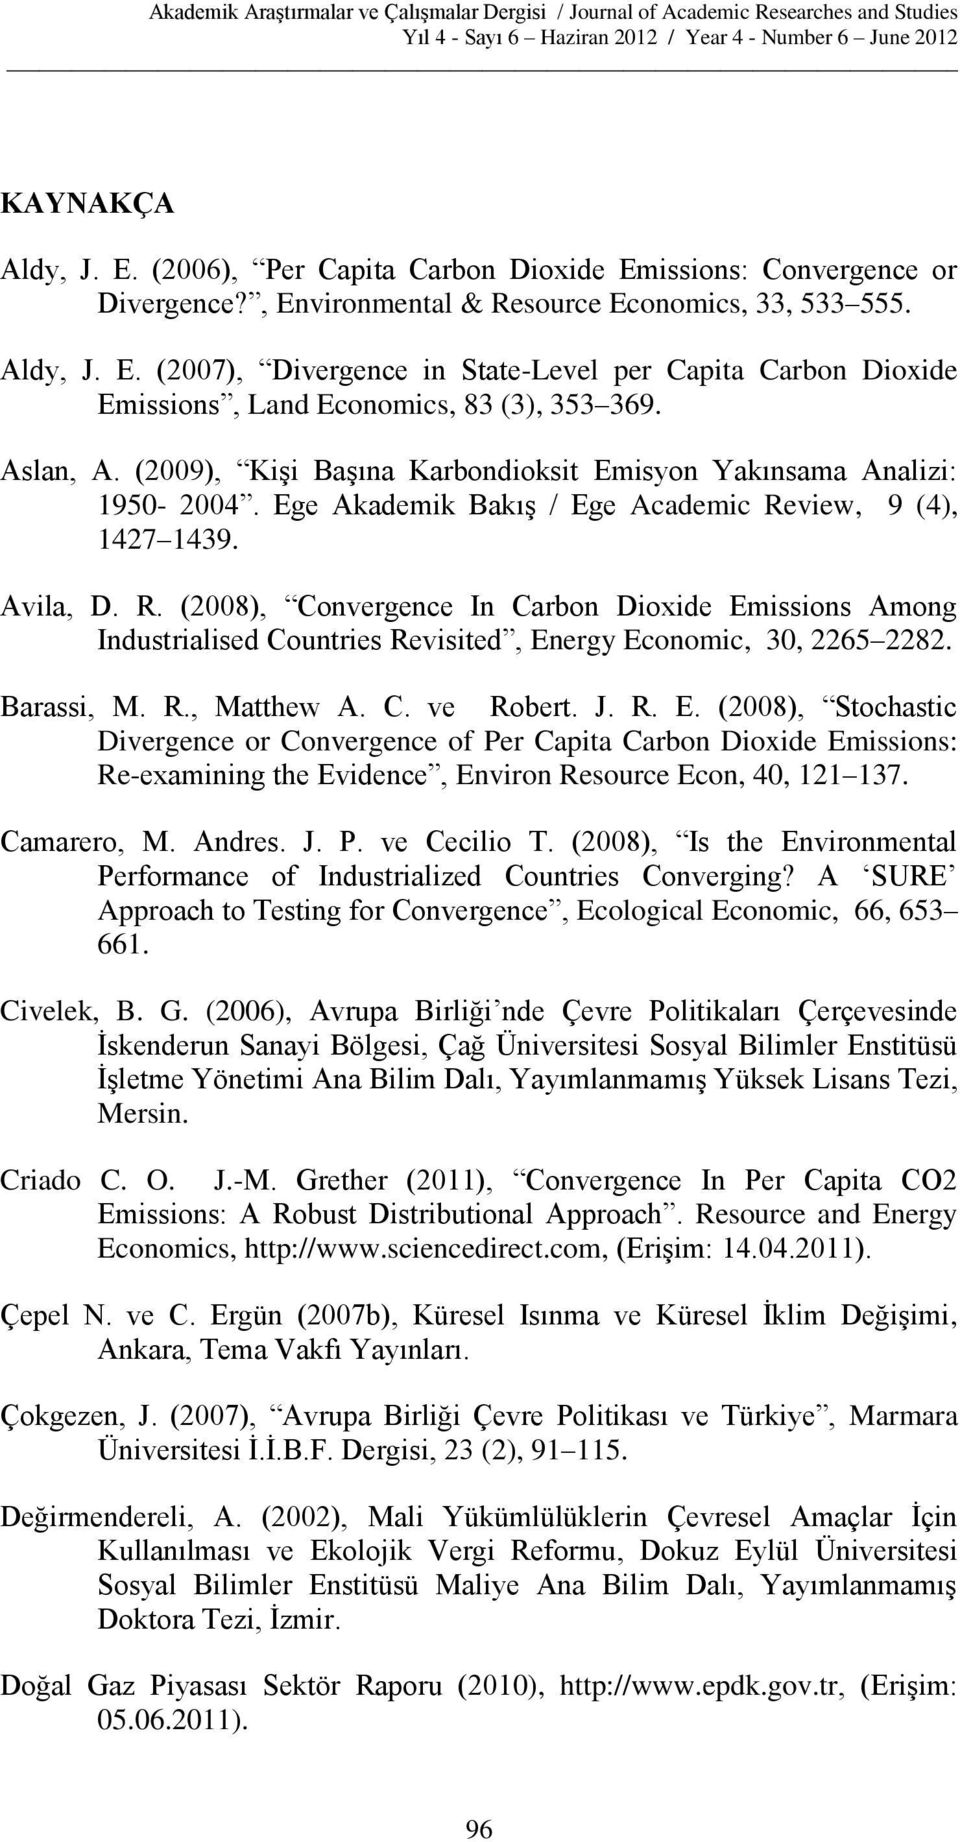 view, 9 (4), 1427 1439. Avila, D. R. (2008), Convergence In Carbon Dioxide Emissions Among Industrialised Countries Revisited, Energy Economic, 30, 2265 2282. Barassi, M. R., Matthew A. C. ve Robert.